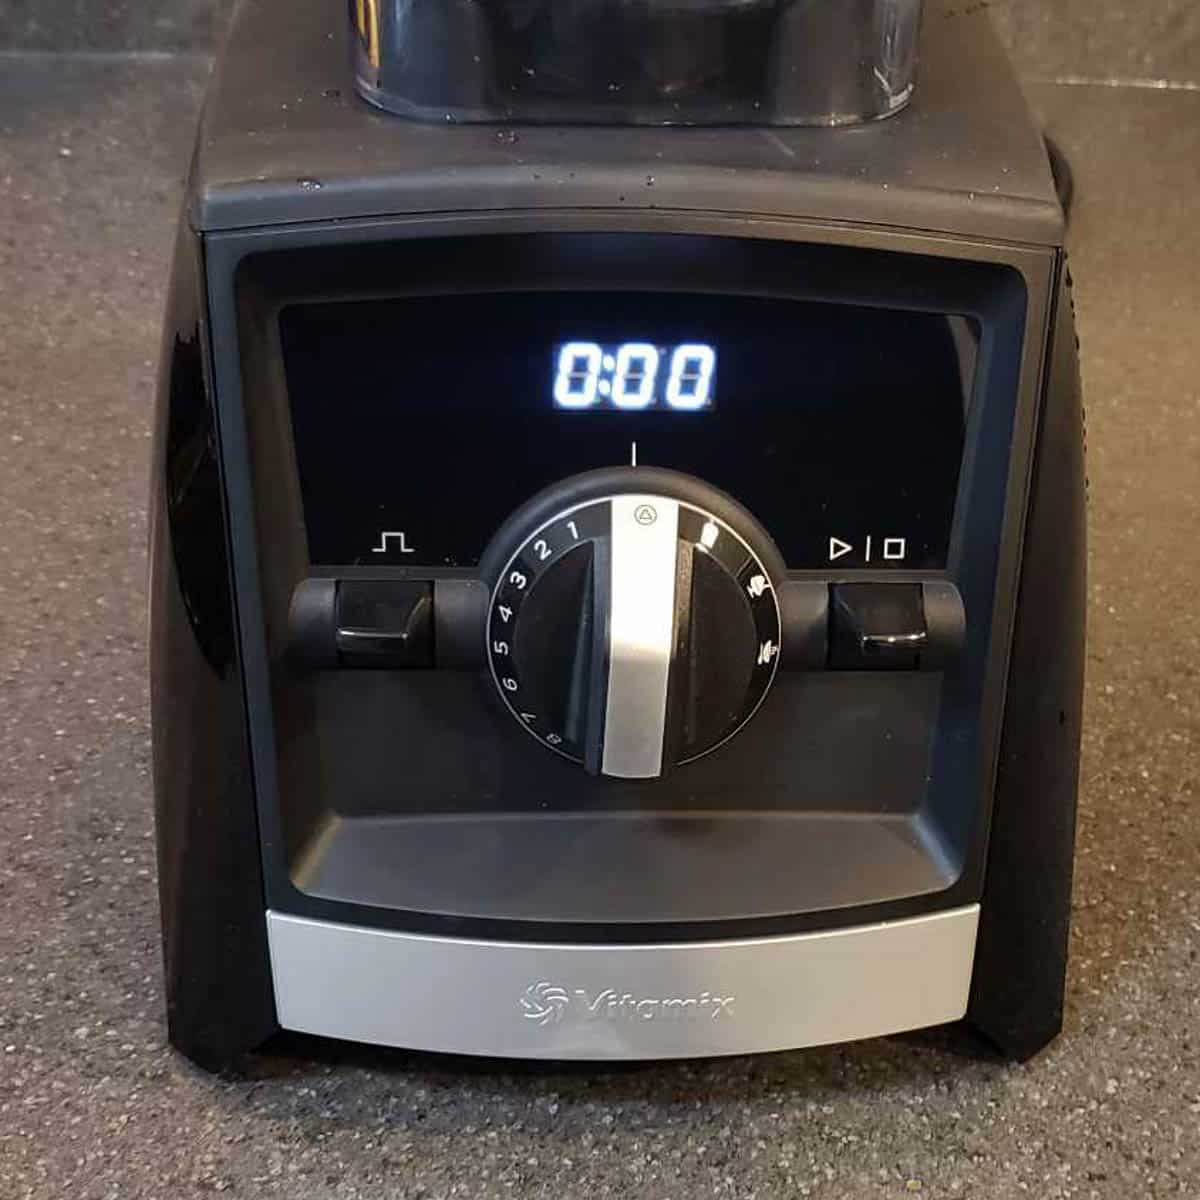 Up close look at the dial of a Vitamix blender